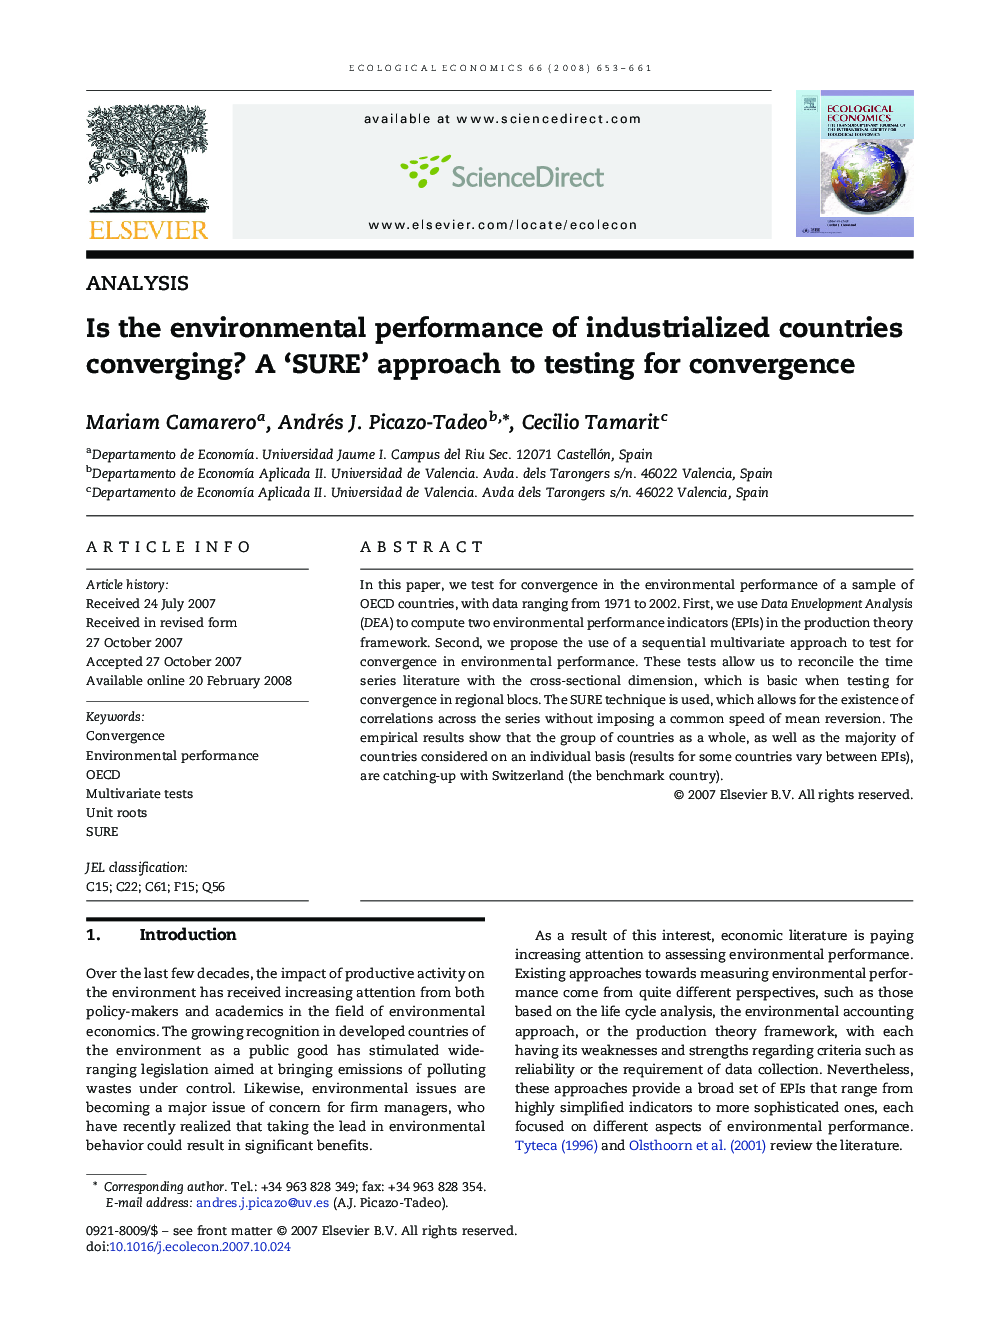 Is the environmental performance of industrialized countries converging? A 'SURE' approach to testing for convergence